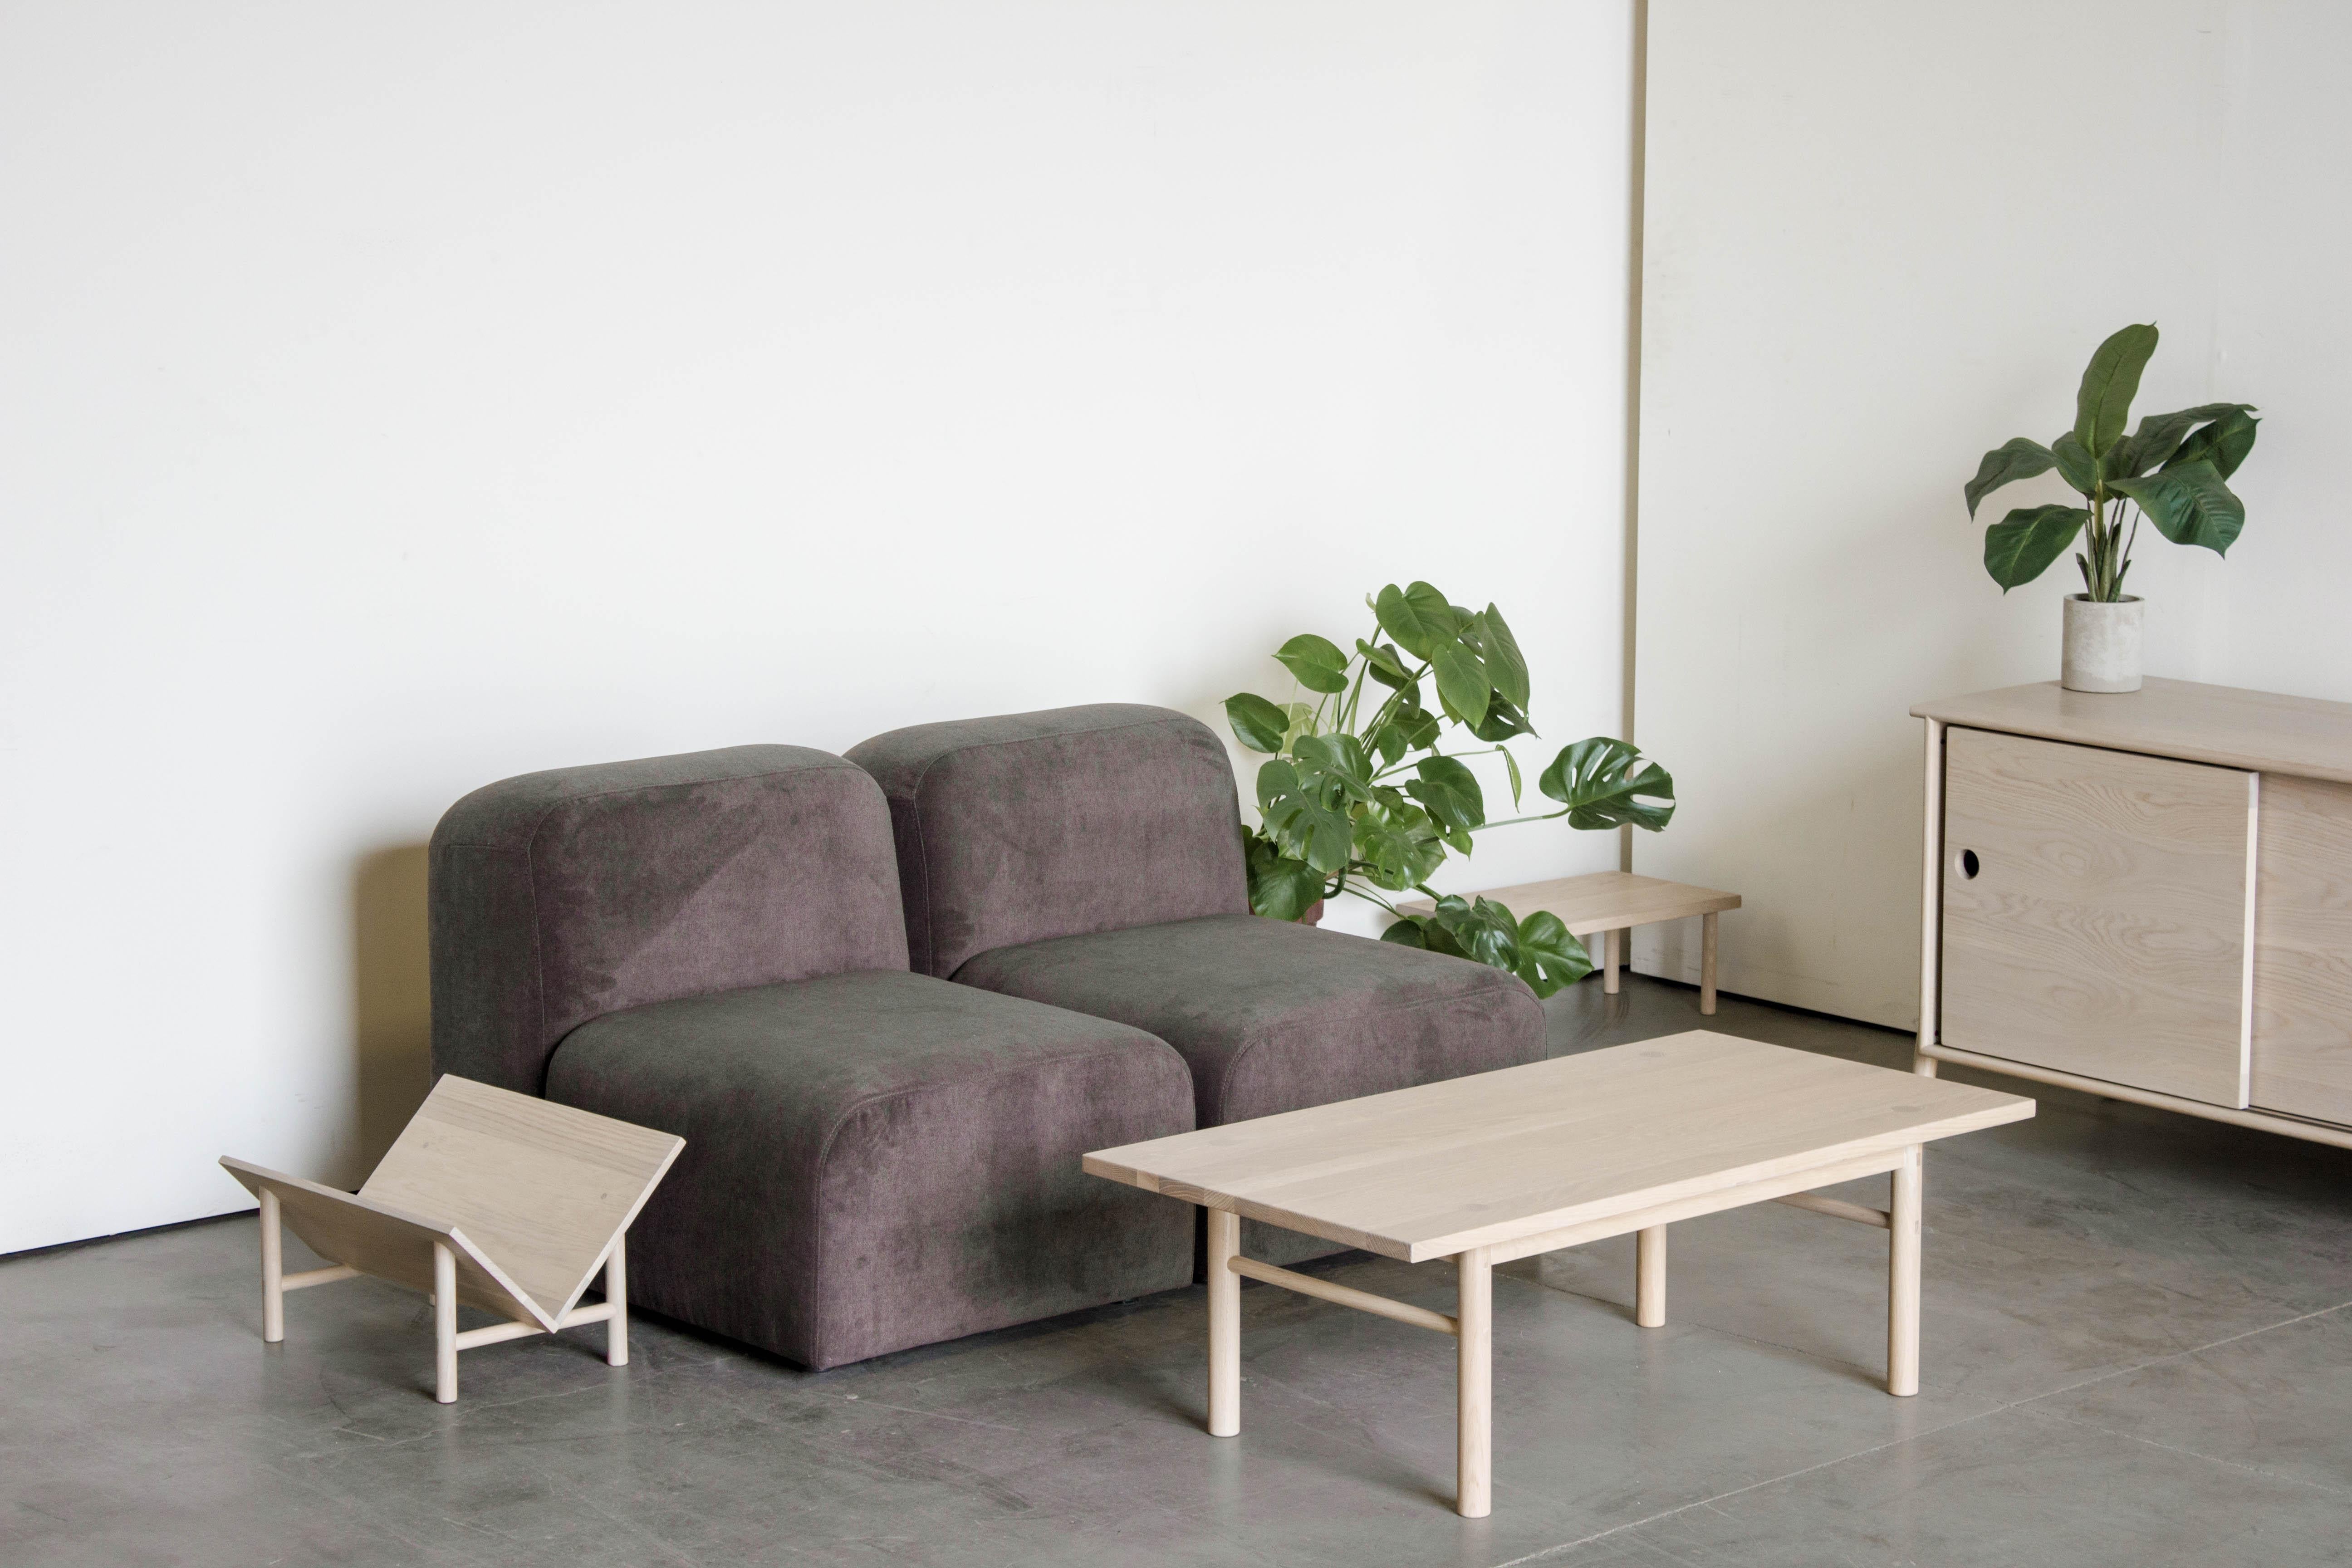 Sun at Six is a contemporary furniture design studio that works with traditional Chinese joinery masters to handcraft our pieces using traditional joinery. A modular sofa - put as many pieces together as you want. Connector hidden underneath to